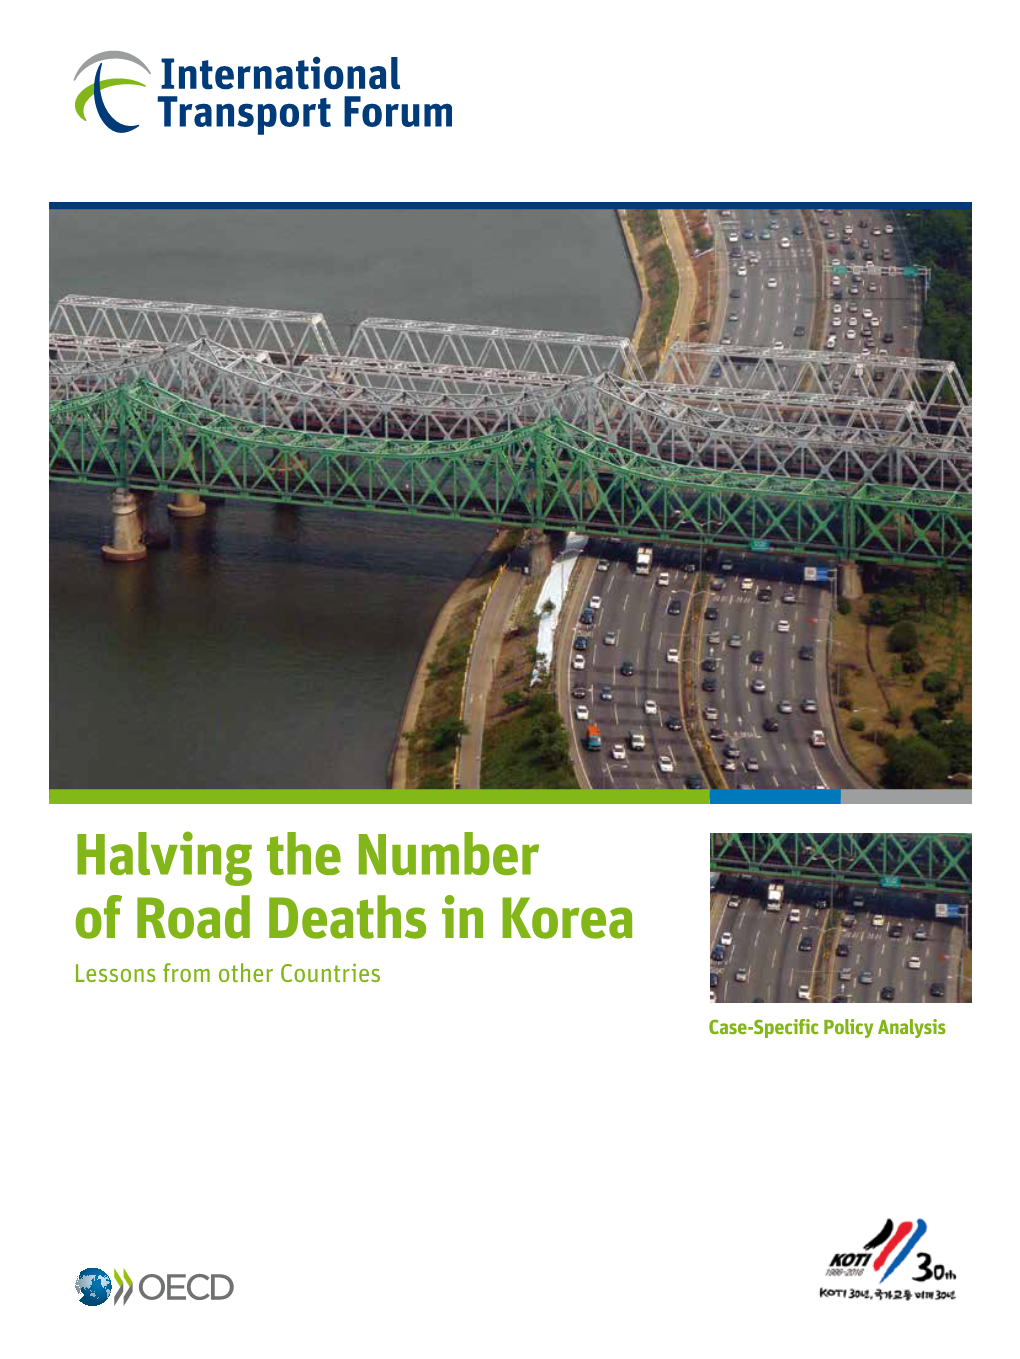 Halving the Number of Road Deaths in Korea Lessons from Other Countries